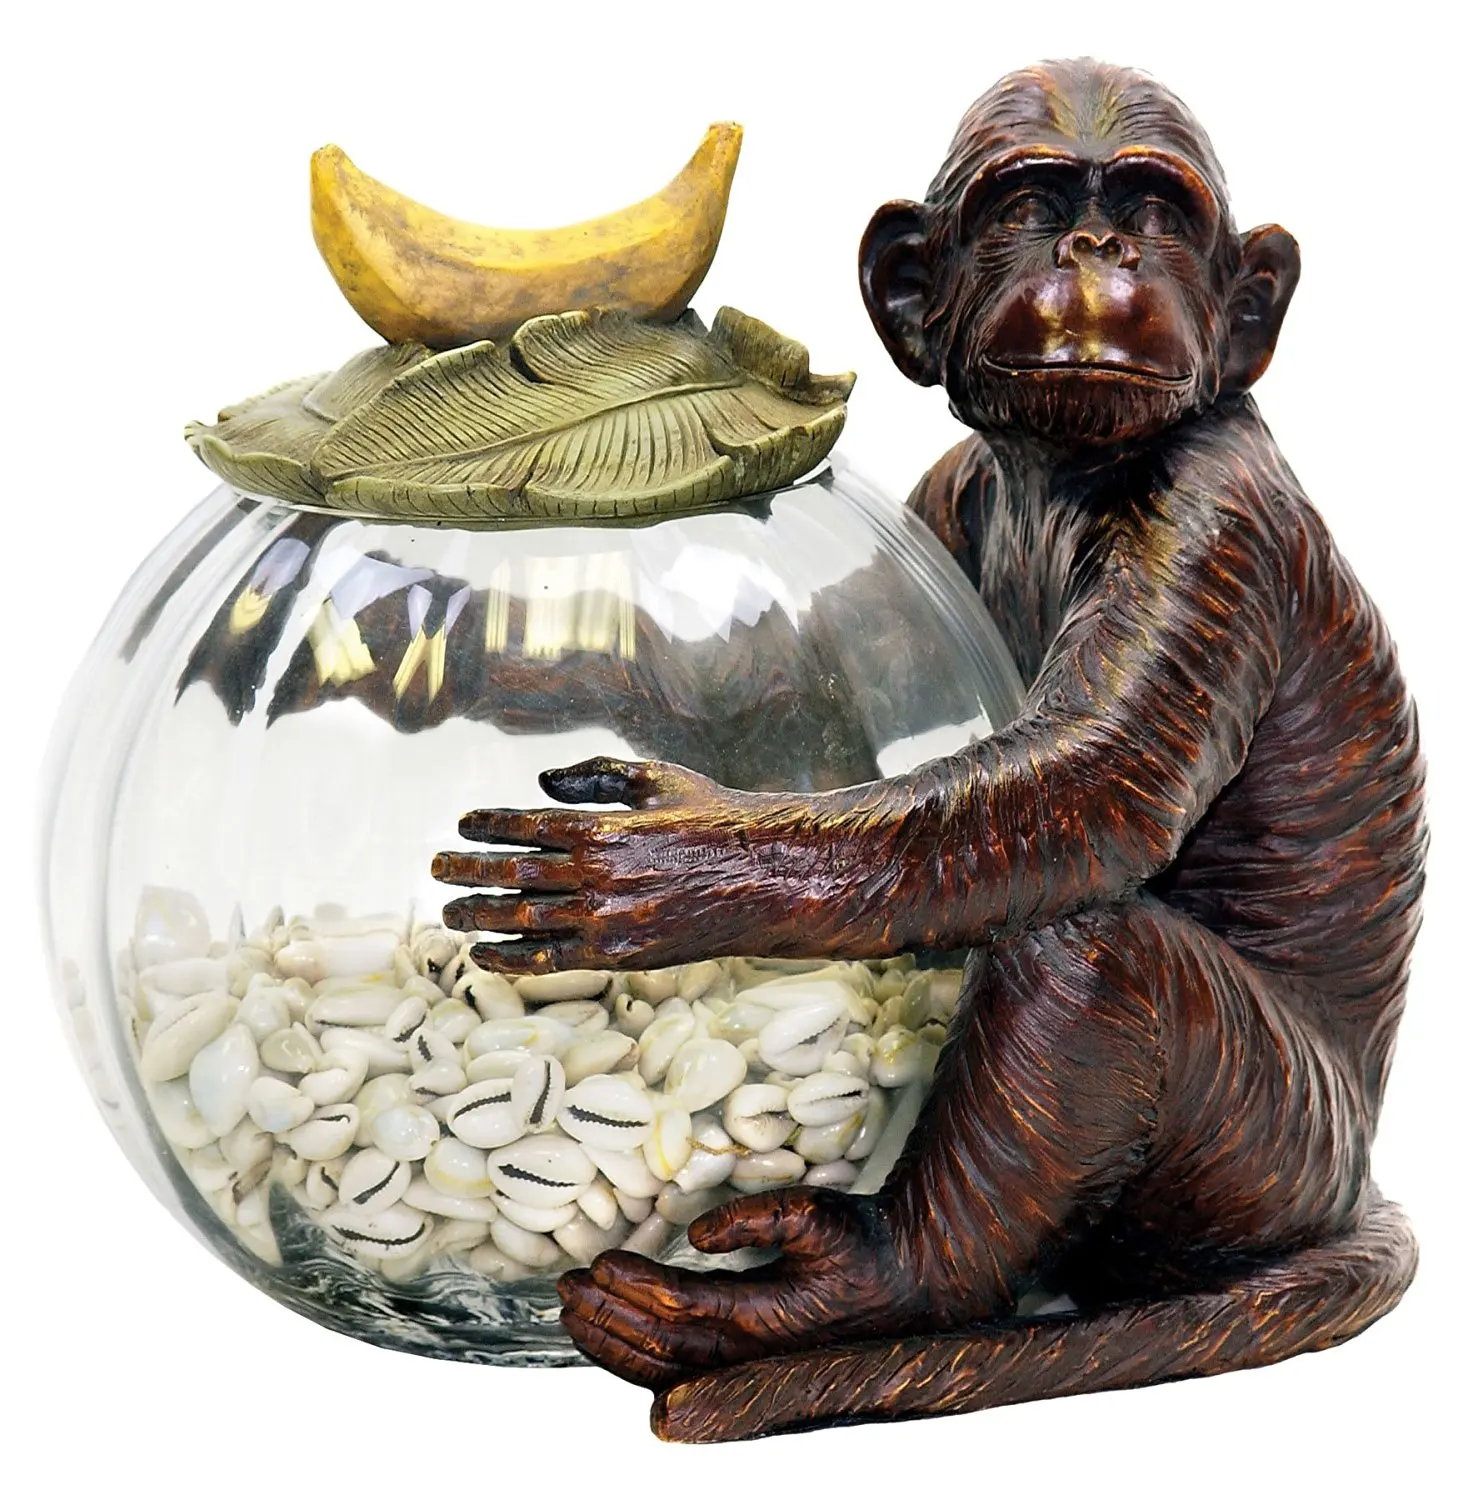 Sterling 91-2081 Composite Wood Monkey Jar Keeper, 9-1/2 by 9-3/4-Inch. 